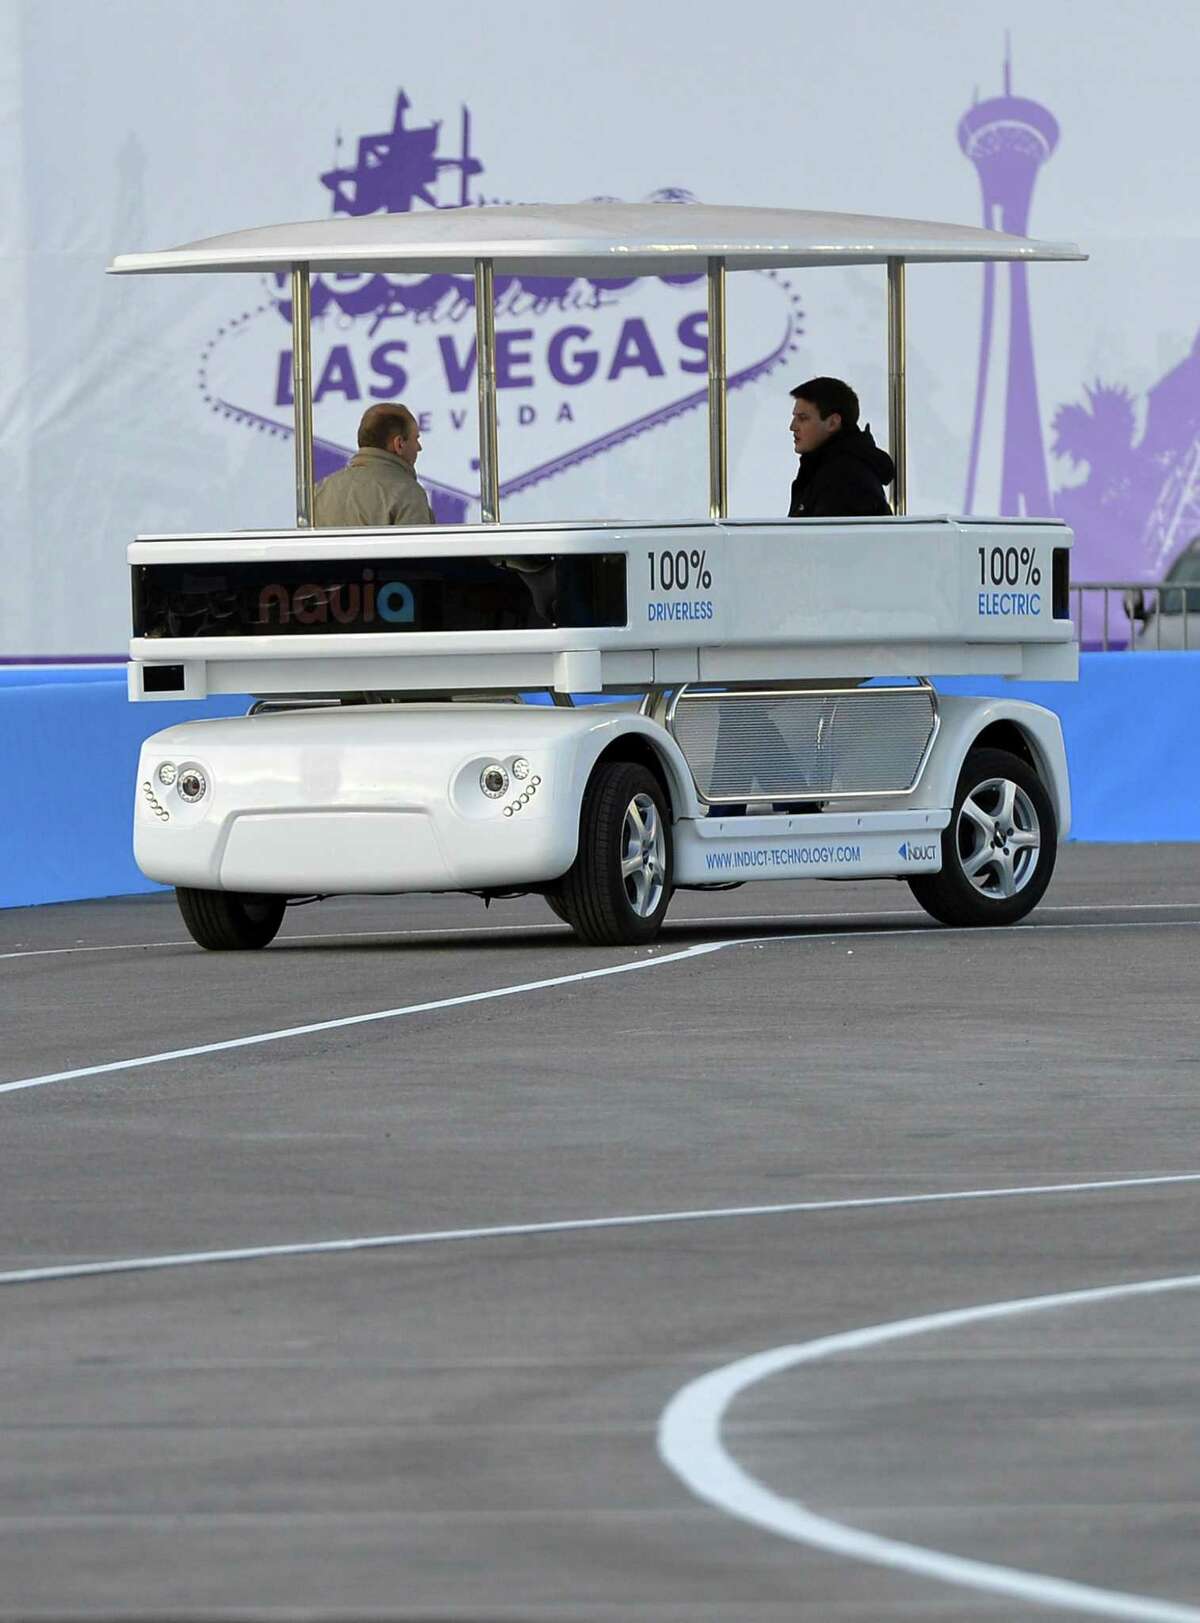 Induct demonstrates their new Navia driverless shuttle at the International Consumer Electronics Show, Monday, Jan. 6, 2014, in Las Vegas. (AP Photo/Jack Dempsey)